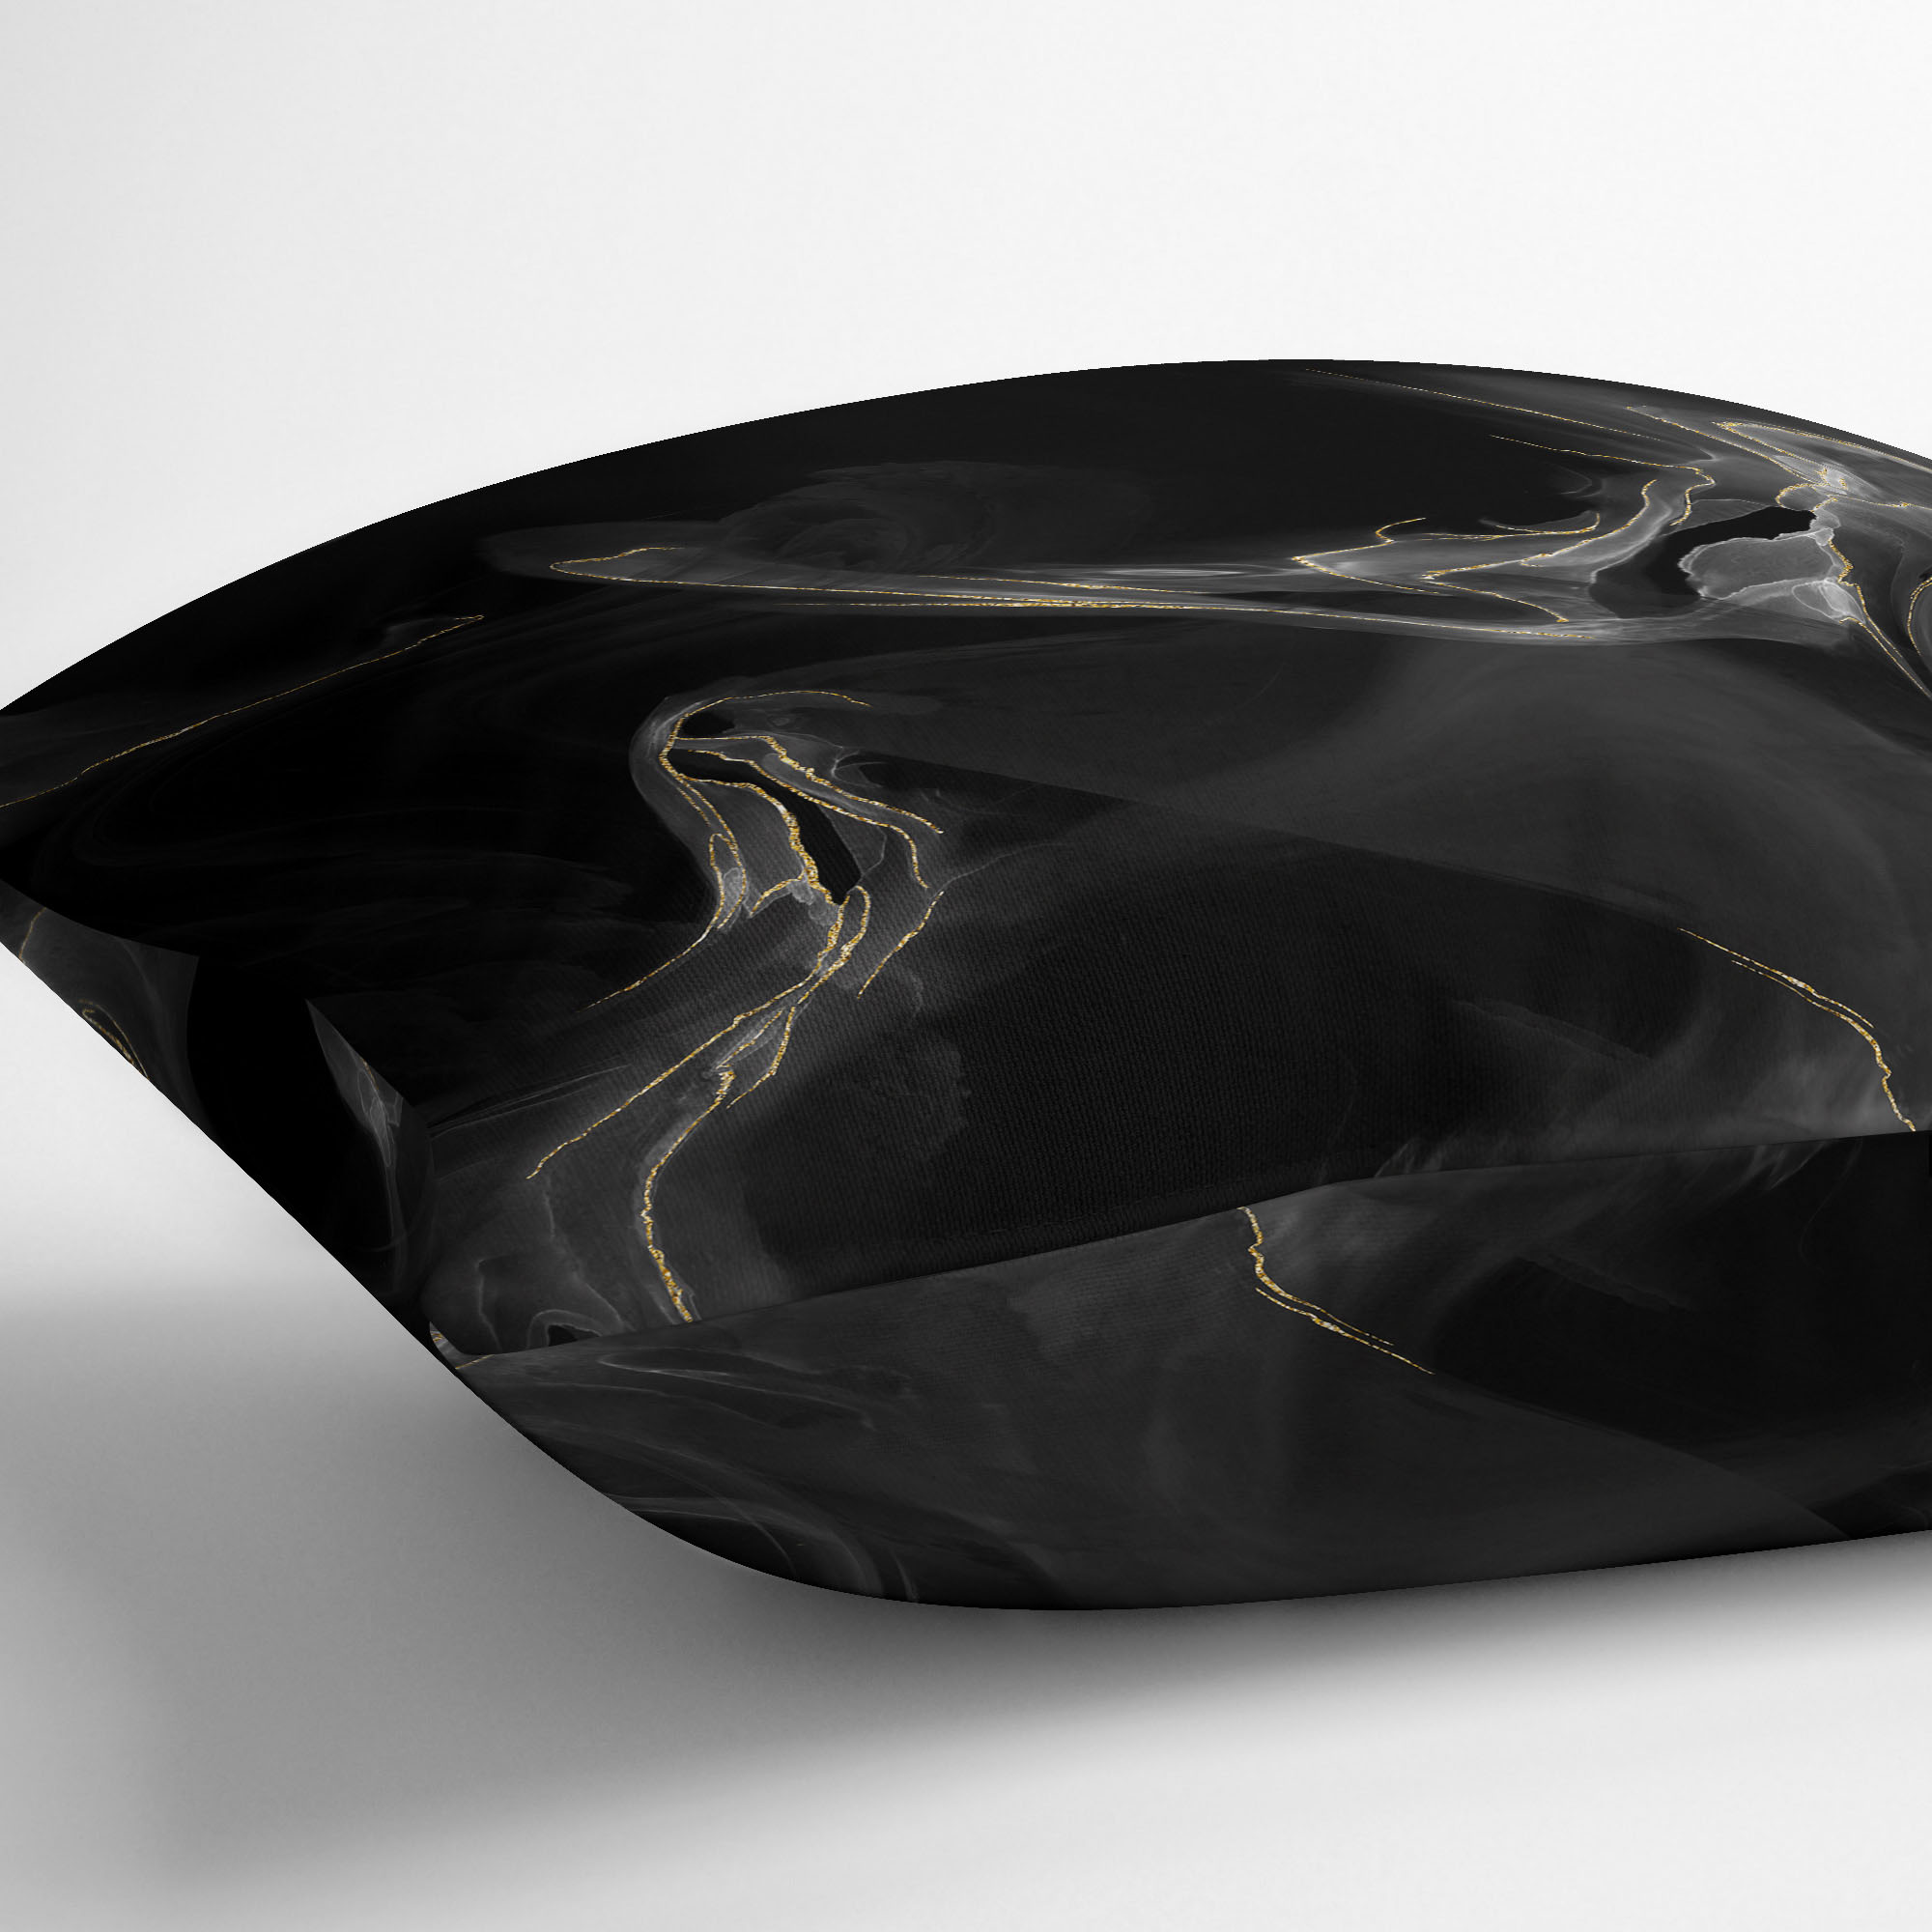 Marble Black Outdoor Pillow by Kavka Designs - image 4 of 5